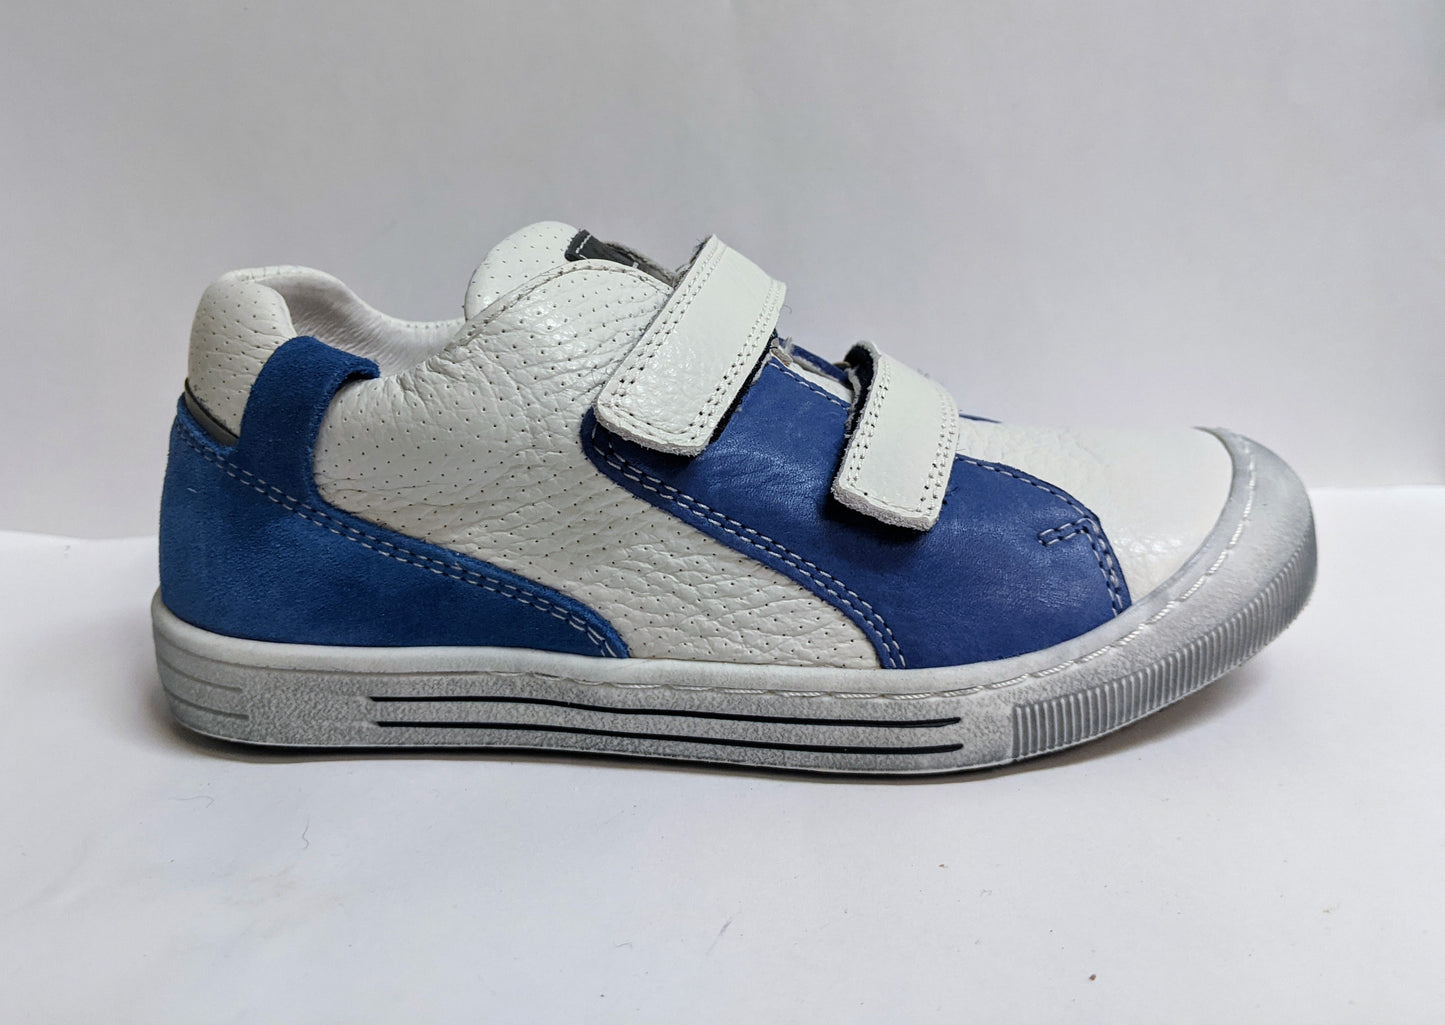 A boys casual shoe by Froddo, style G3130092, in white and blue leather with vlecro fastening. Right side view.